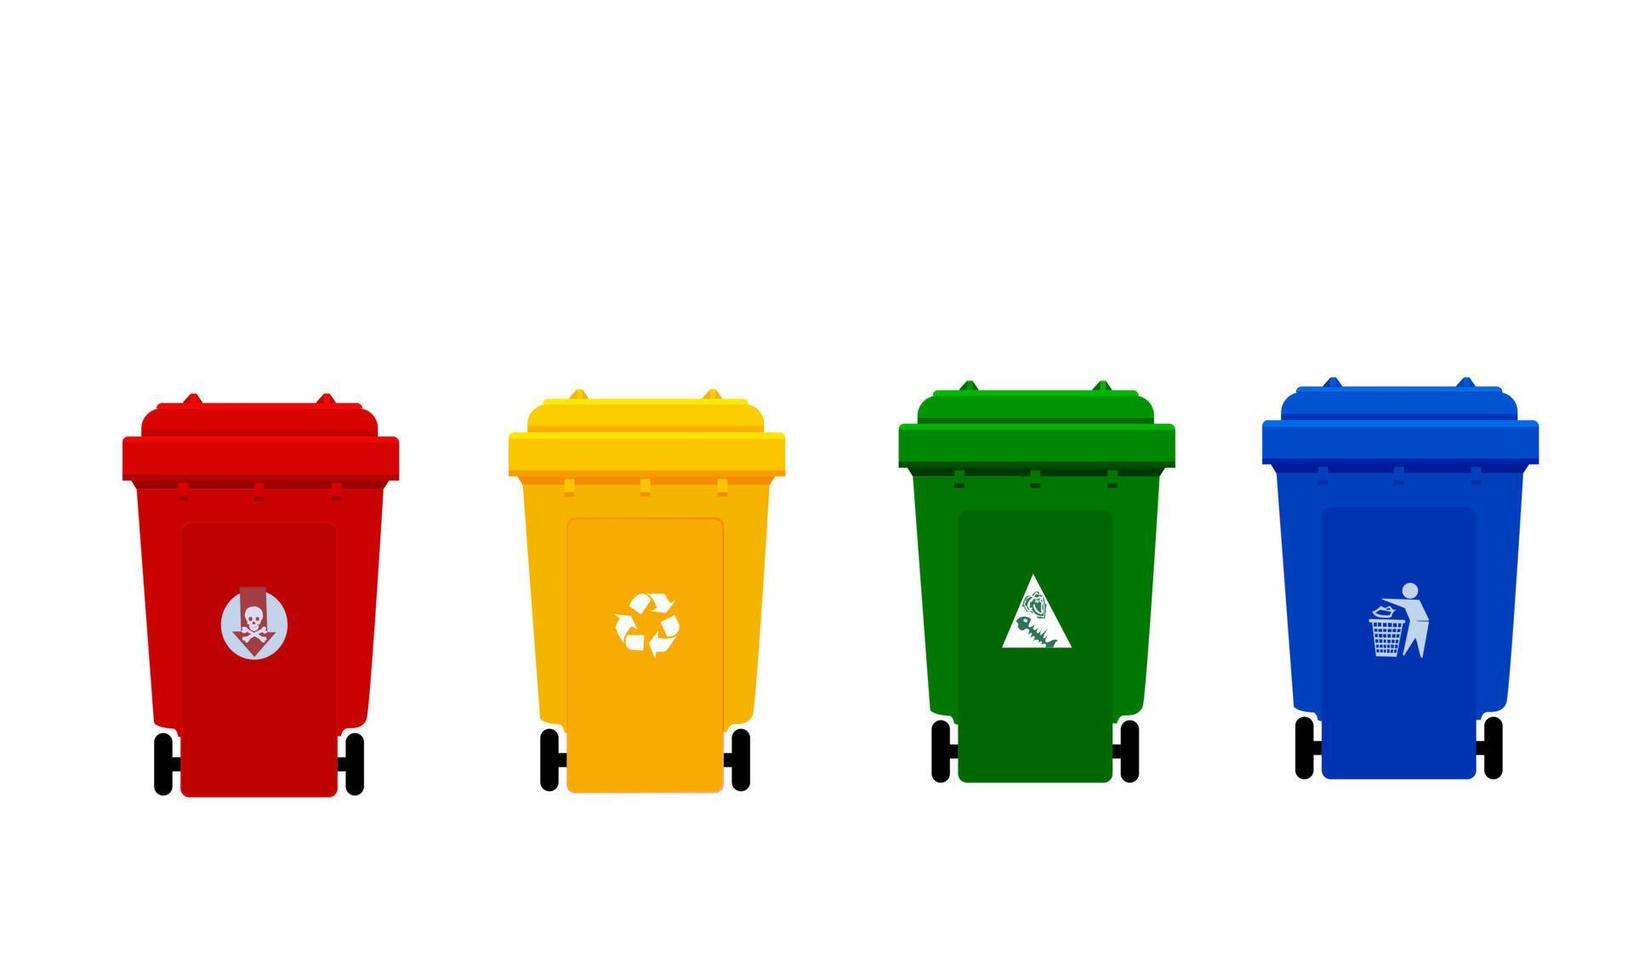 Plastic trash bin, red, yellow, green and blue four color trash bin with symbol, the front image of all four plastic waste bins, vector